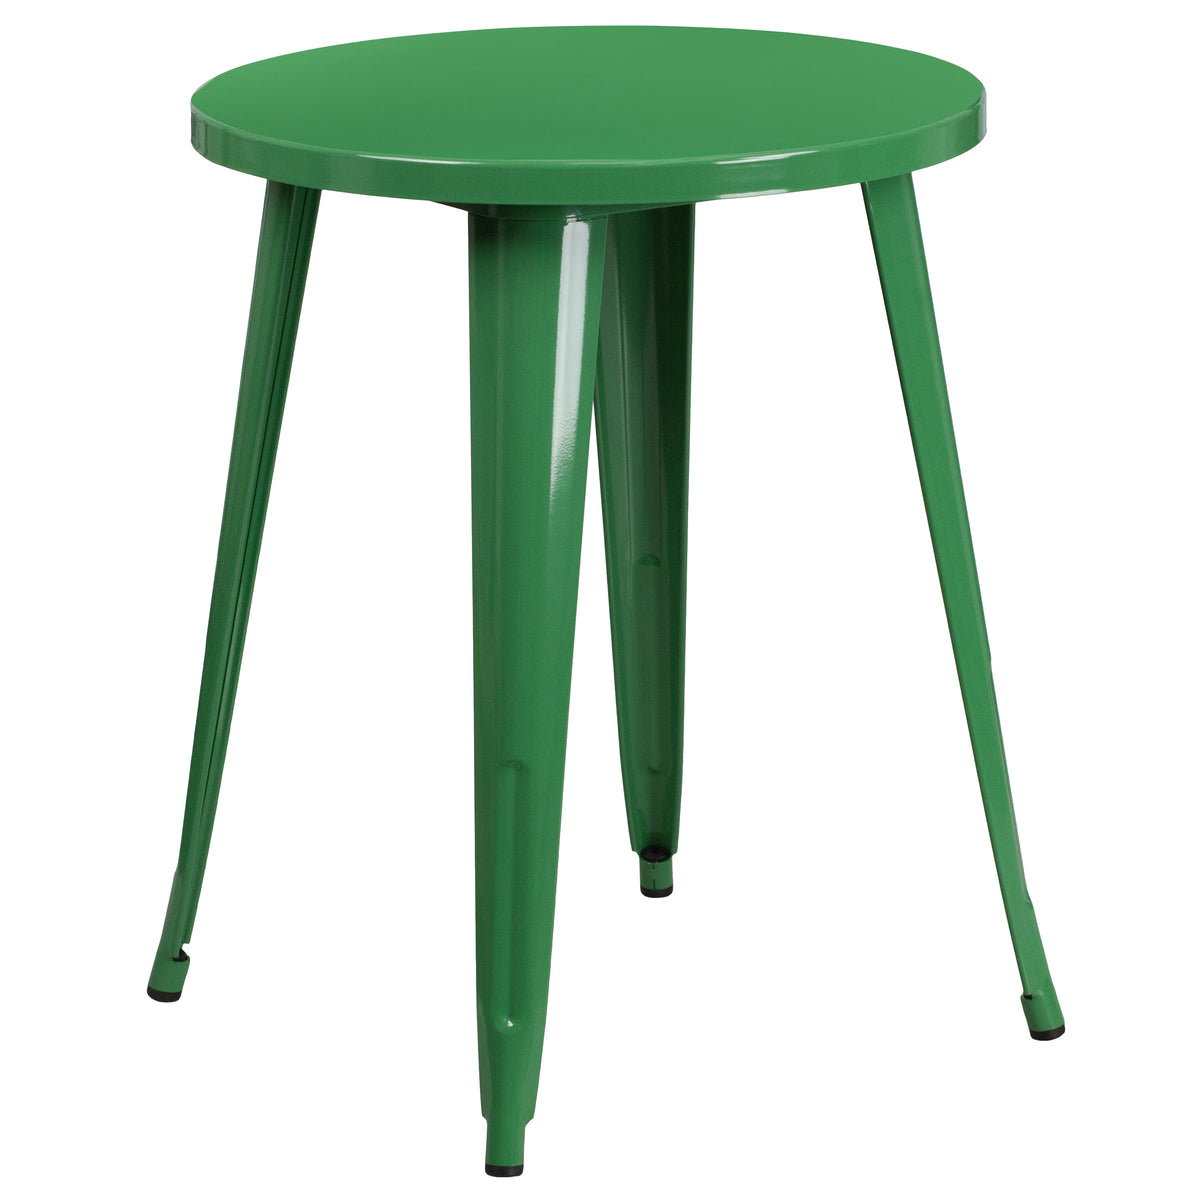 Green |#| 24inch Round Green Metal Indoor-Outdoor Table Set with 4 Arm Chairs